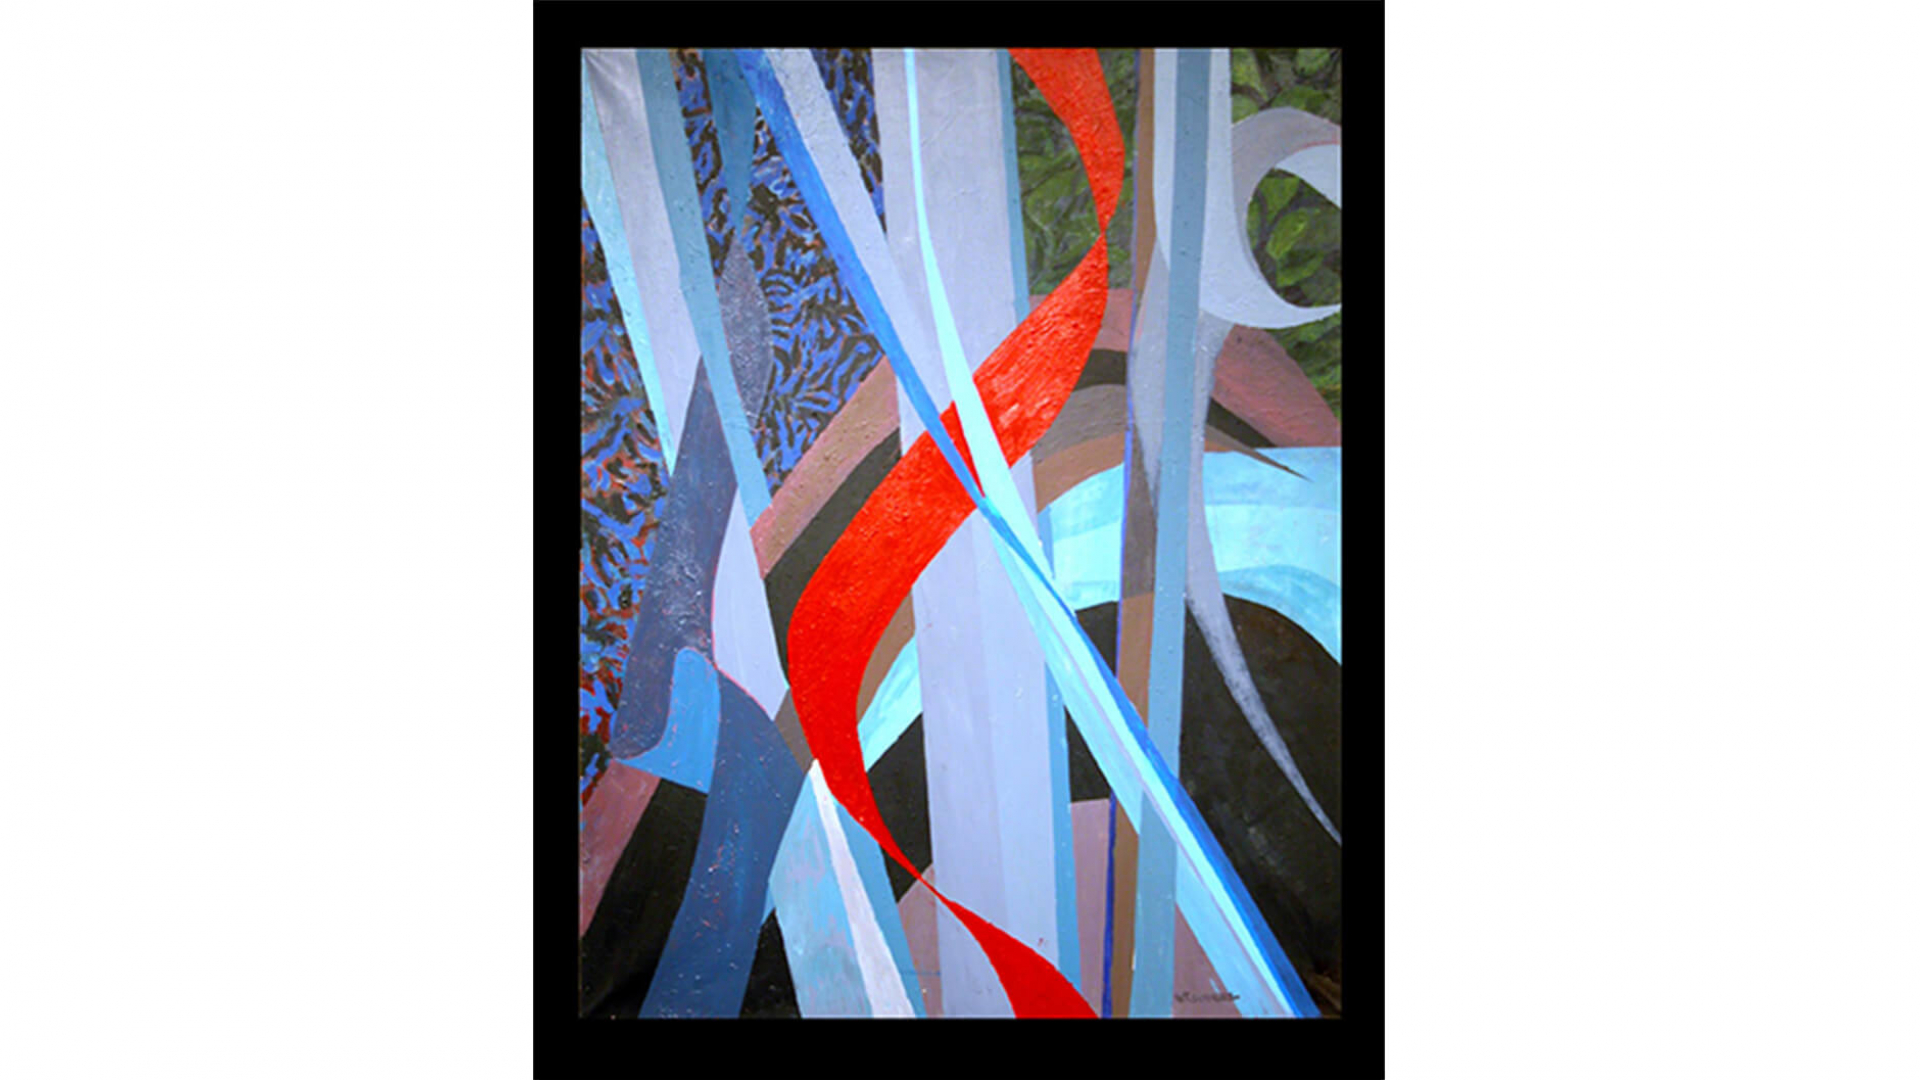 Acrylic painting on canvas; lines of shades of blue, red, and green.